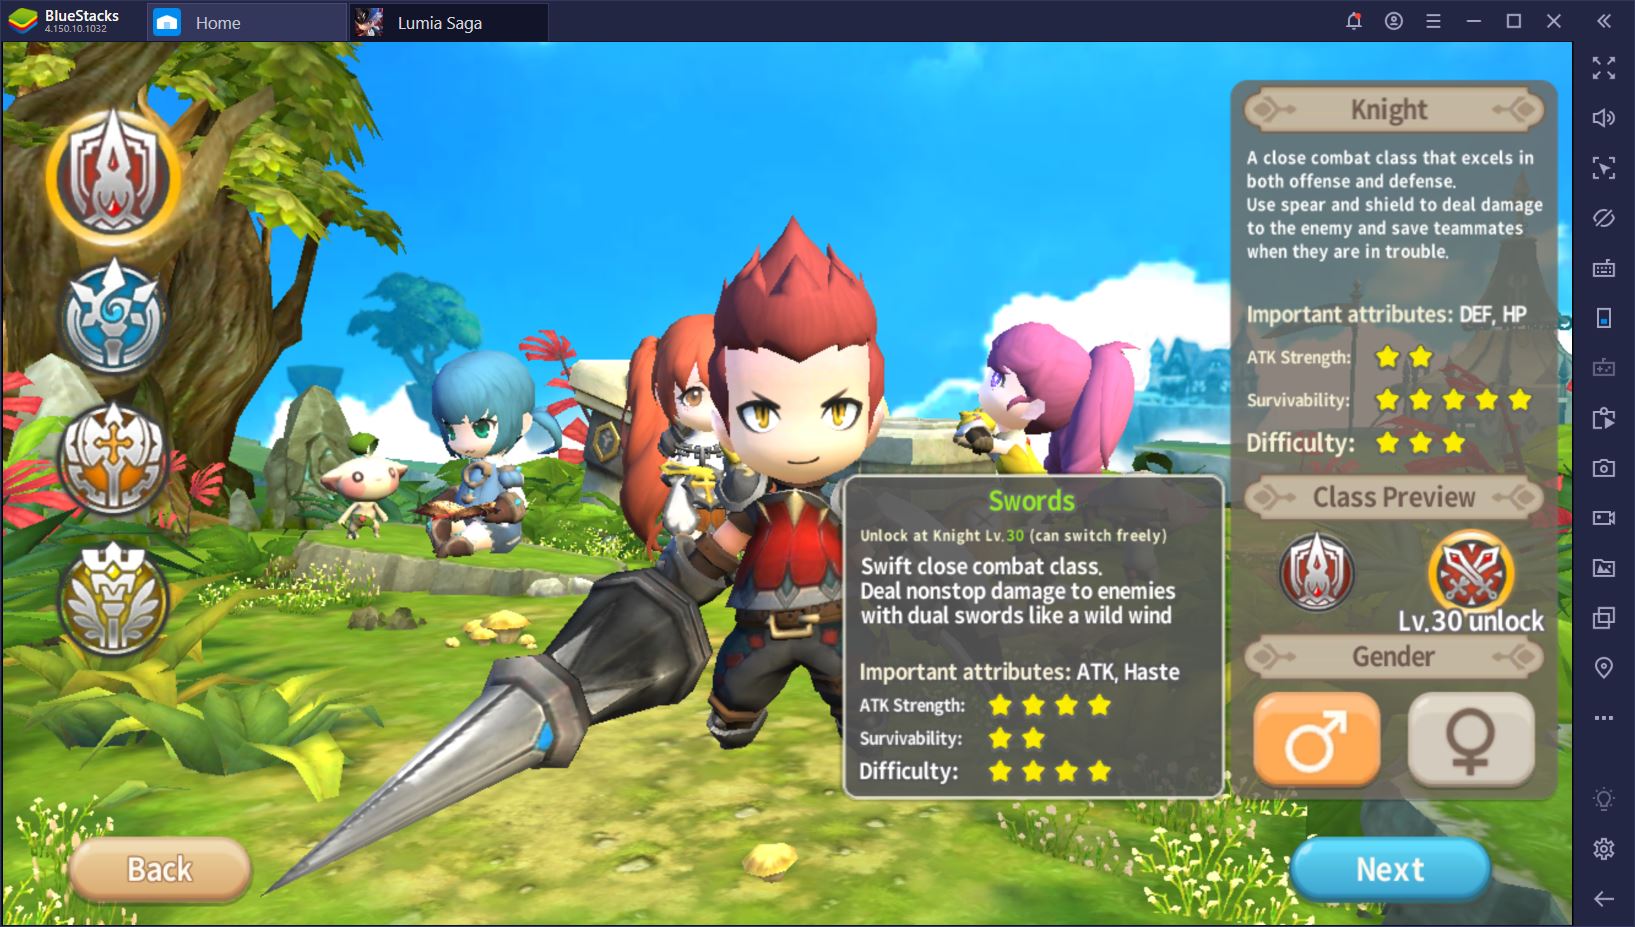 Lumia Saga: The Complete Guide to Classes and Character Development